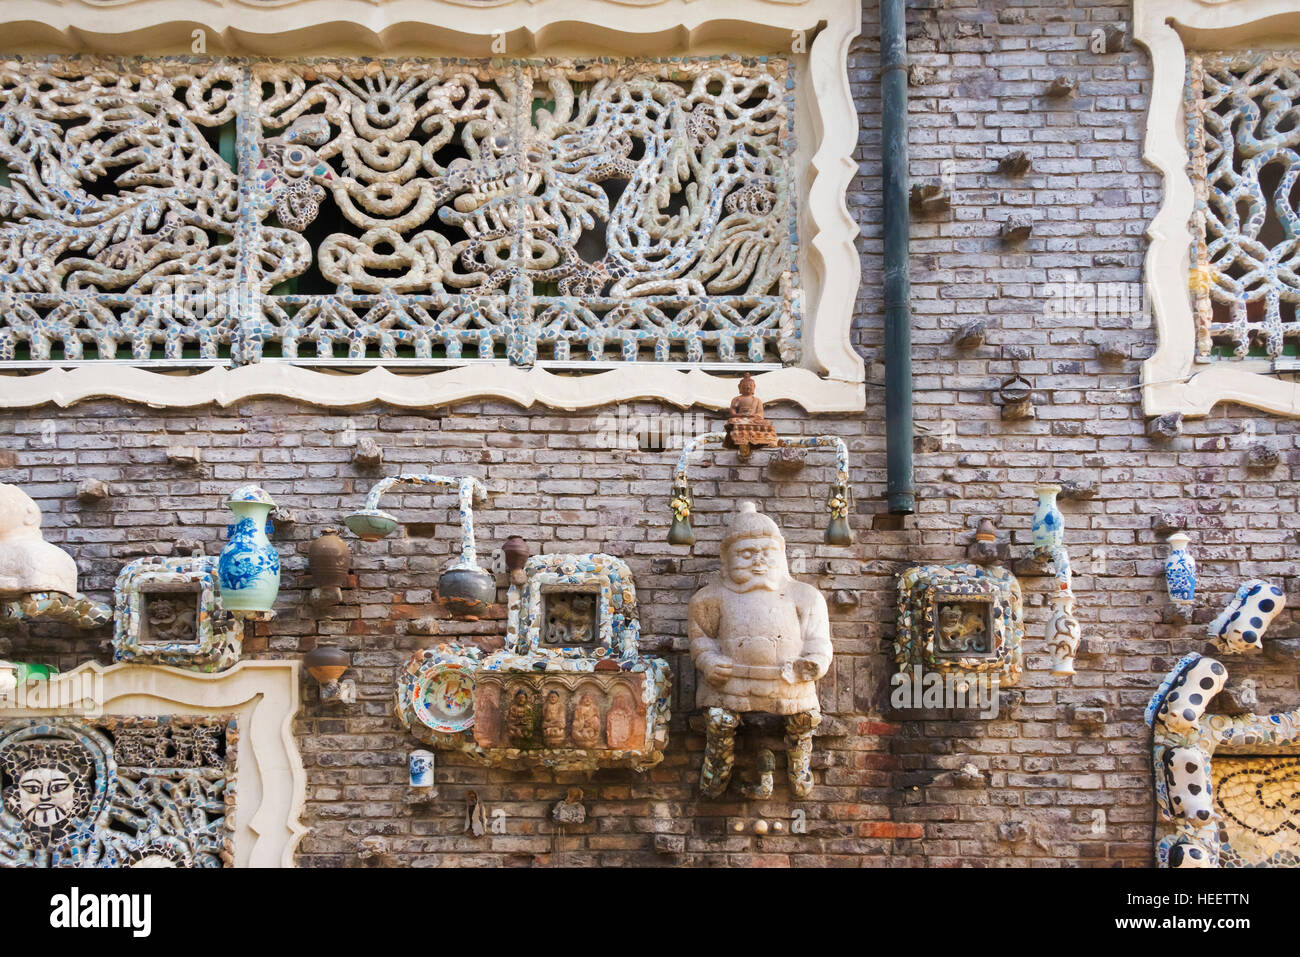 Decorations on the exterior of Geda Lou (Knotty Building), a colonial townhouse built in 1937, Tianjin, China Stock Photo